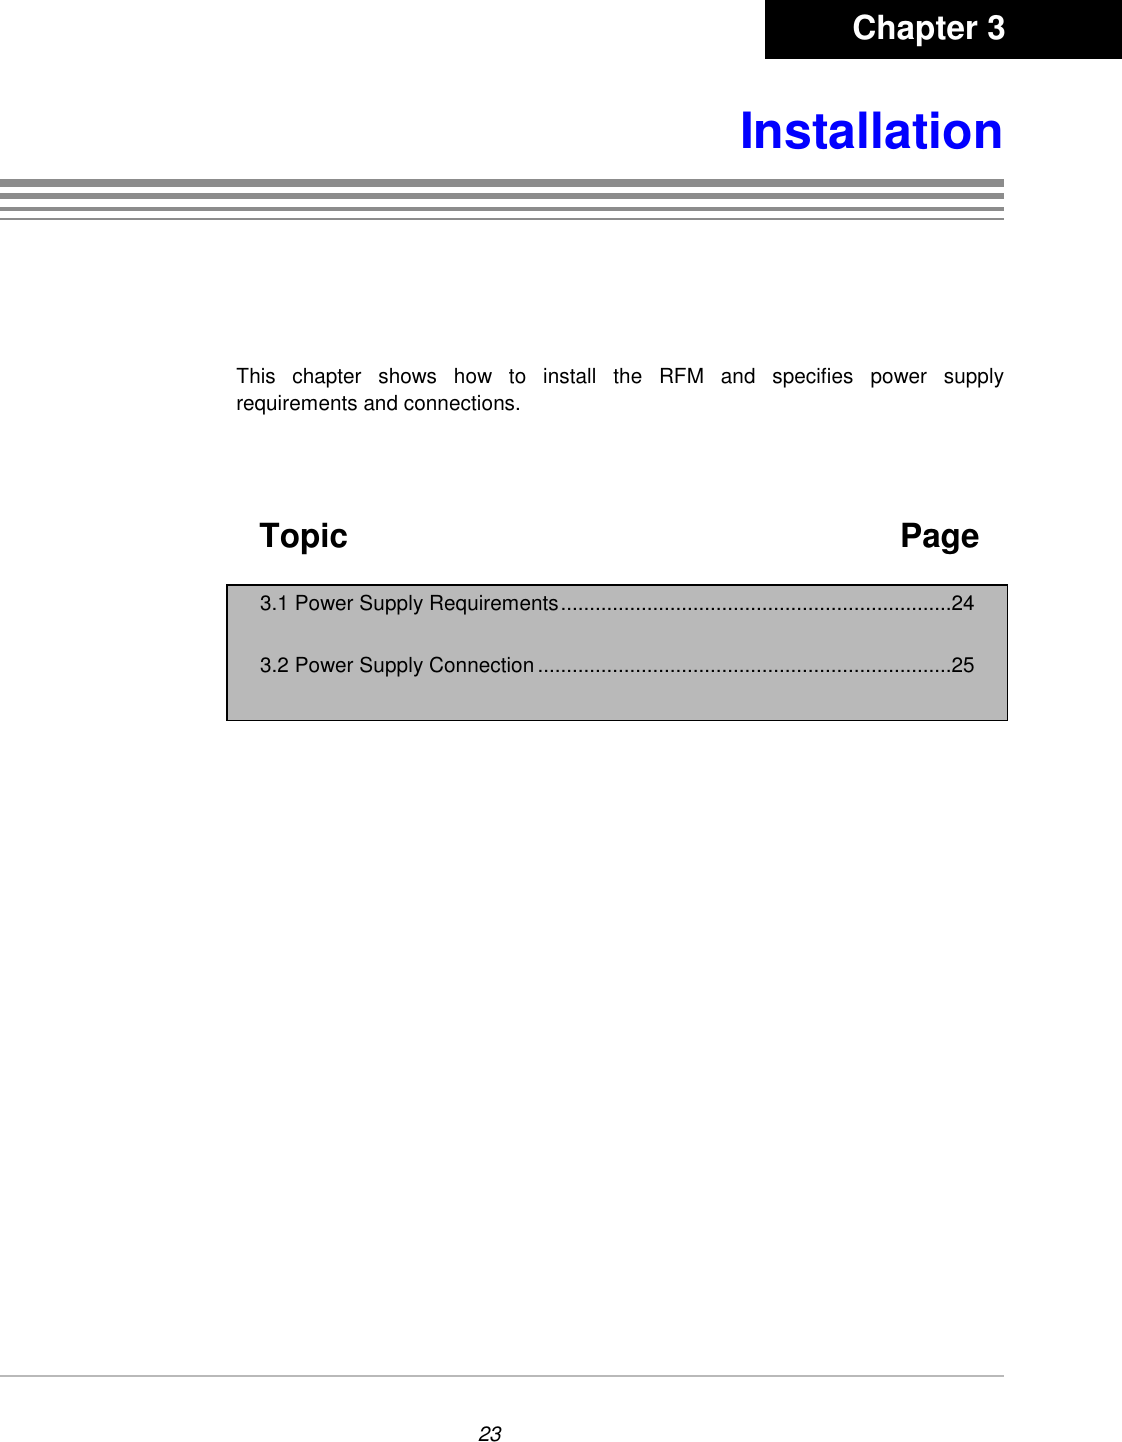 23InstallationThis chapter shows how to install the RFM and specifies power supplyrequirements and connections.    Topic Page3.1 Power Supply Requirements....................................................................243.2 Power Supply Connection ........................................................................25     Chapter 3